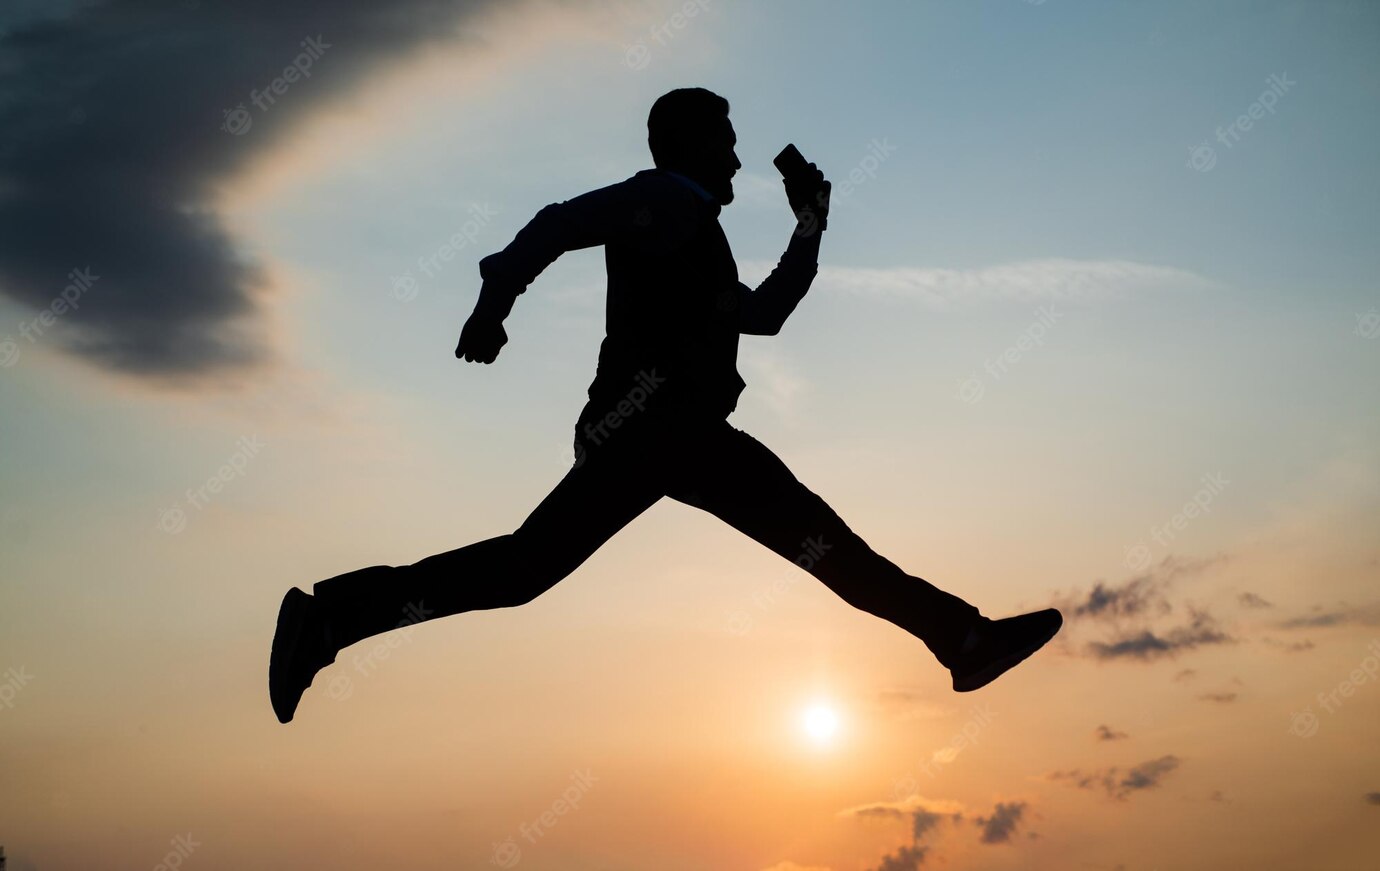 total-freedom-personal-achievement-goal-man-silhouette-jump-sky-background-confident-businessman-running-daily-motivation-enjoying-life-nature-business-success-freedom_474717-27597.jpg